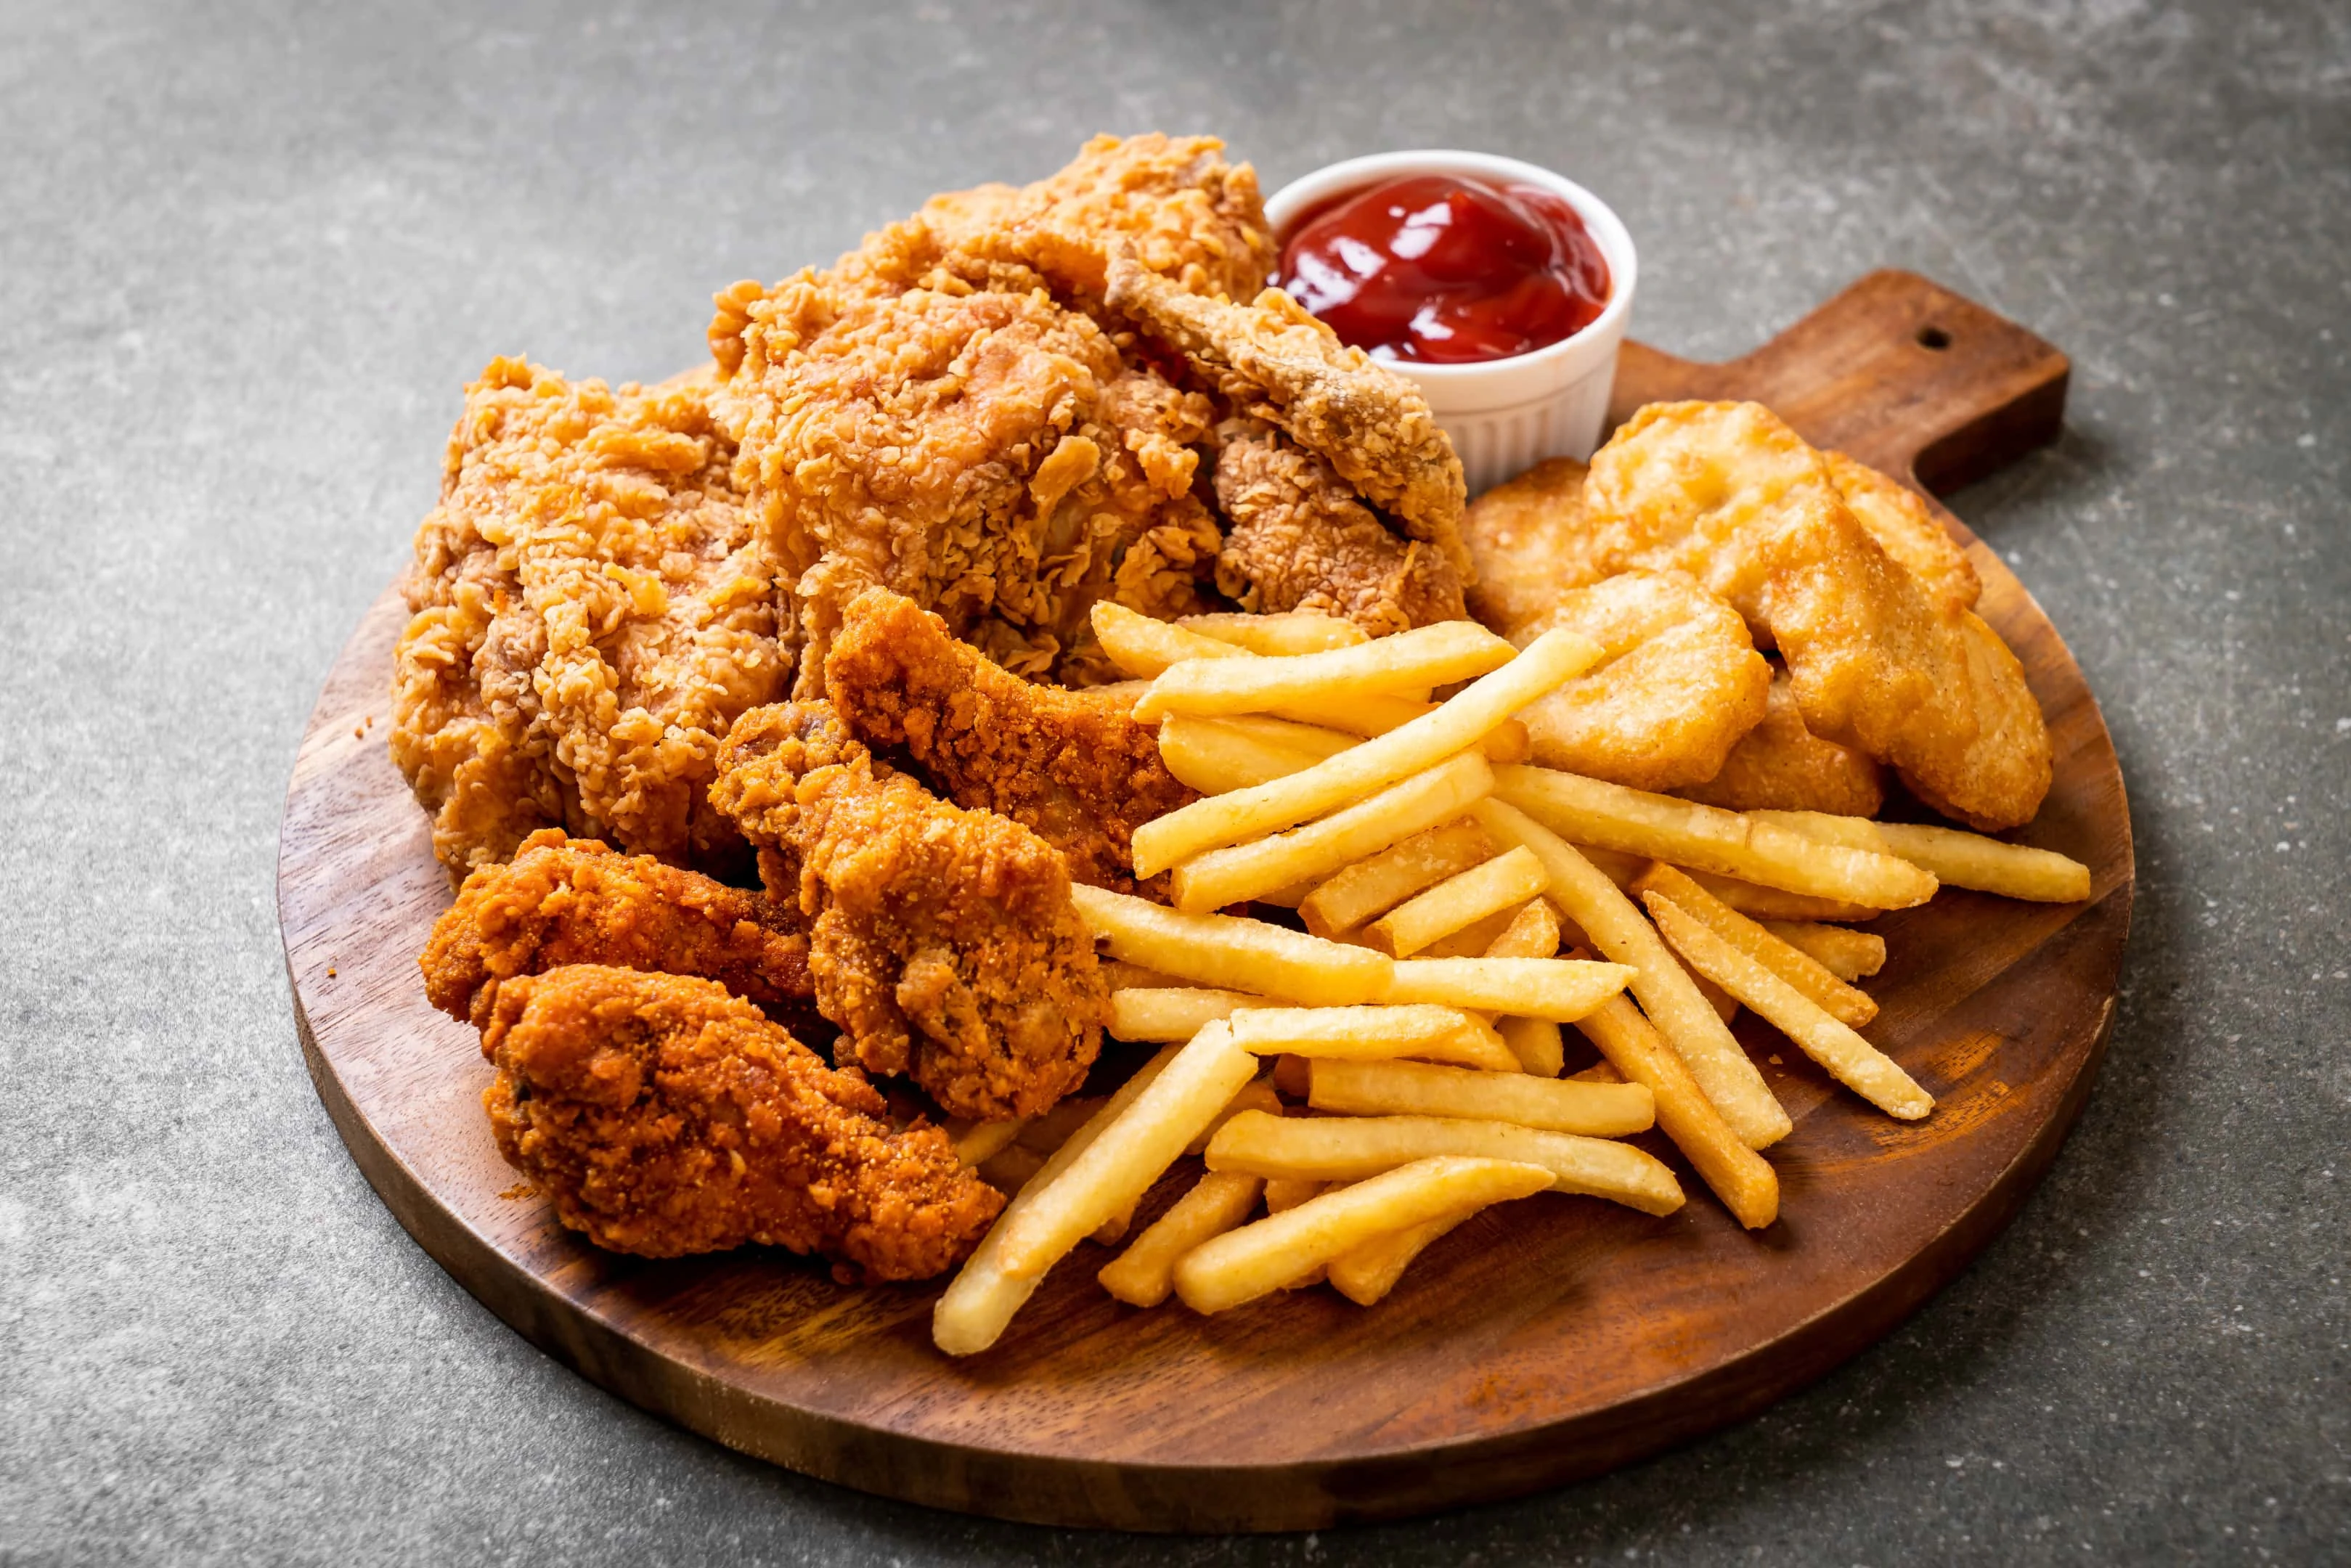 Fried chicken with french fries and nuggets on wooden board